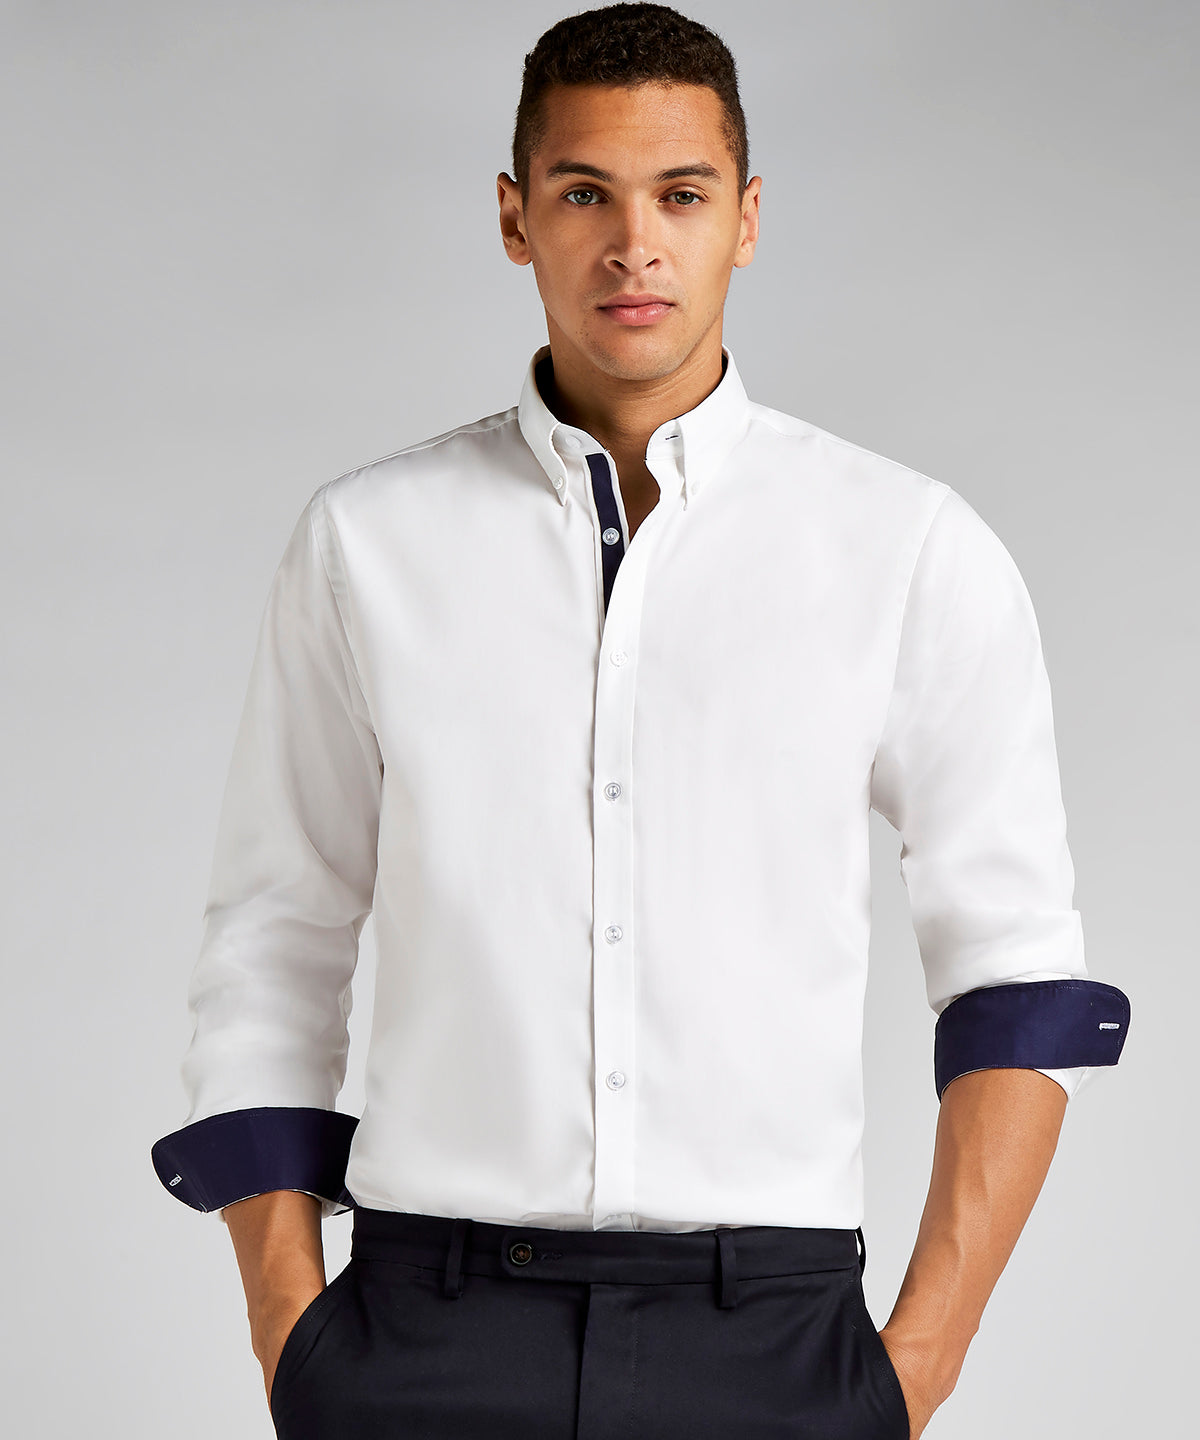 Bolir - Contrast Premium Oxford Shirt (button-down Collar) Long-sleeved (tailored Fit)